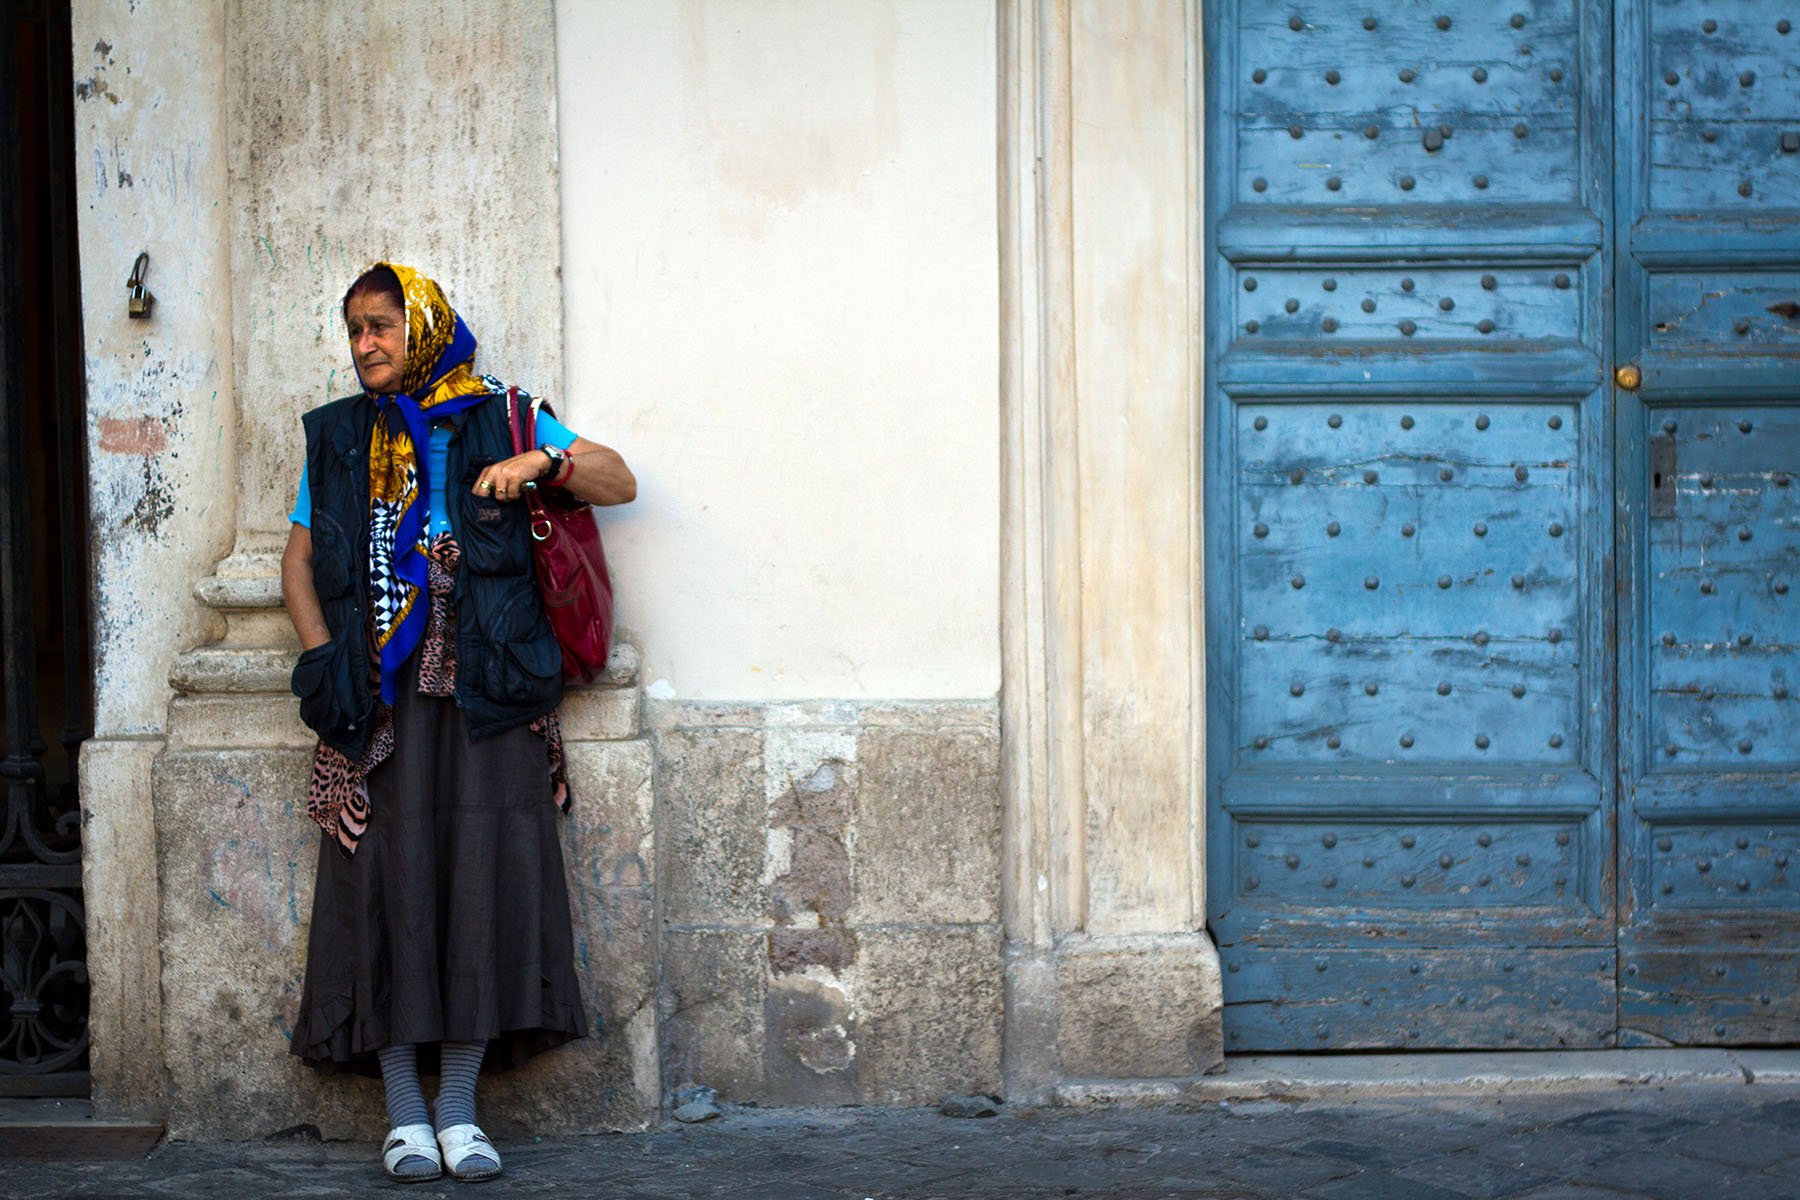 A Roma woman is standing on the street, next to large blue doors of the Basilica of Santa Maria in Rome's Trastevere district. She's colorfully dressed, but looking sad.